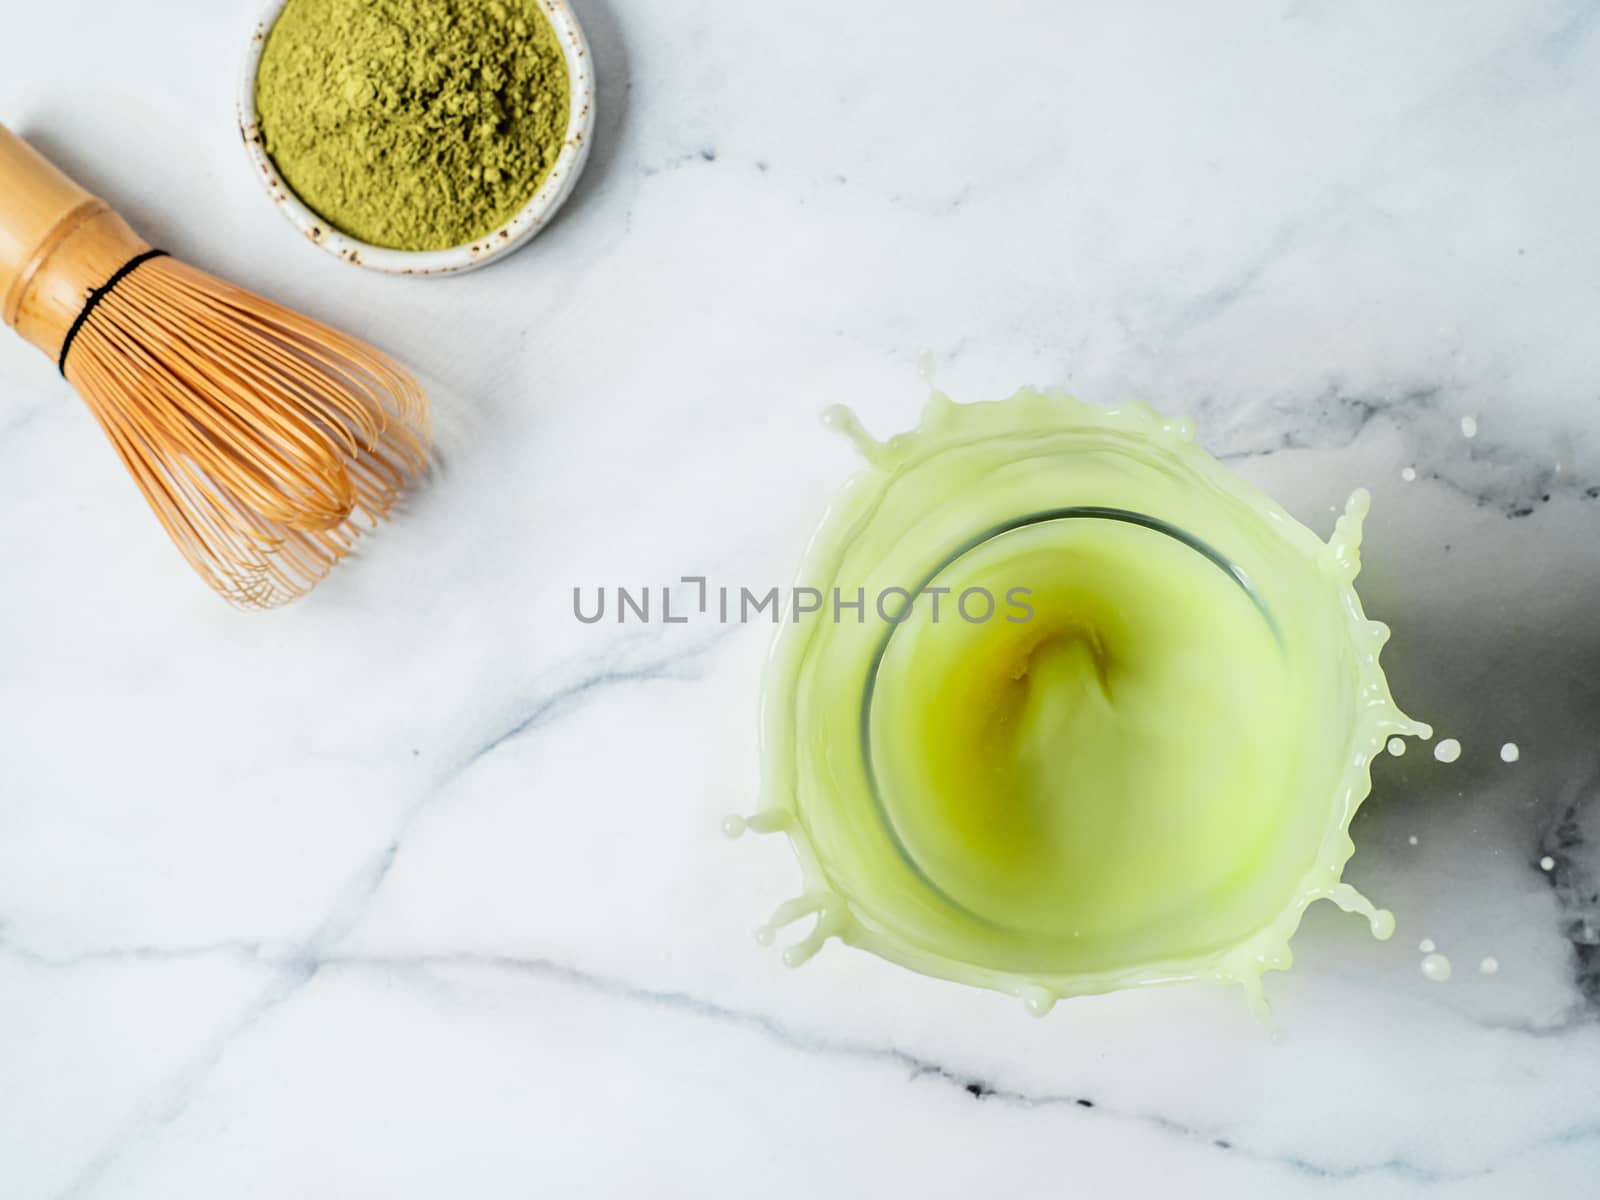 Homemade iced matcha latte with splashes over white marble background. Top view or flat lay. Copy space for text or design